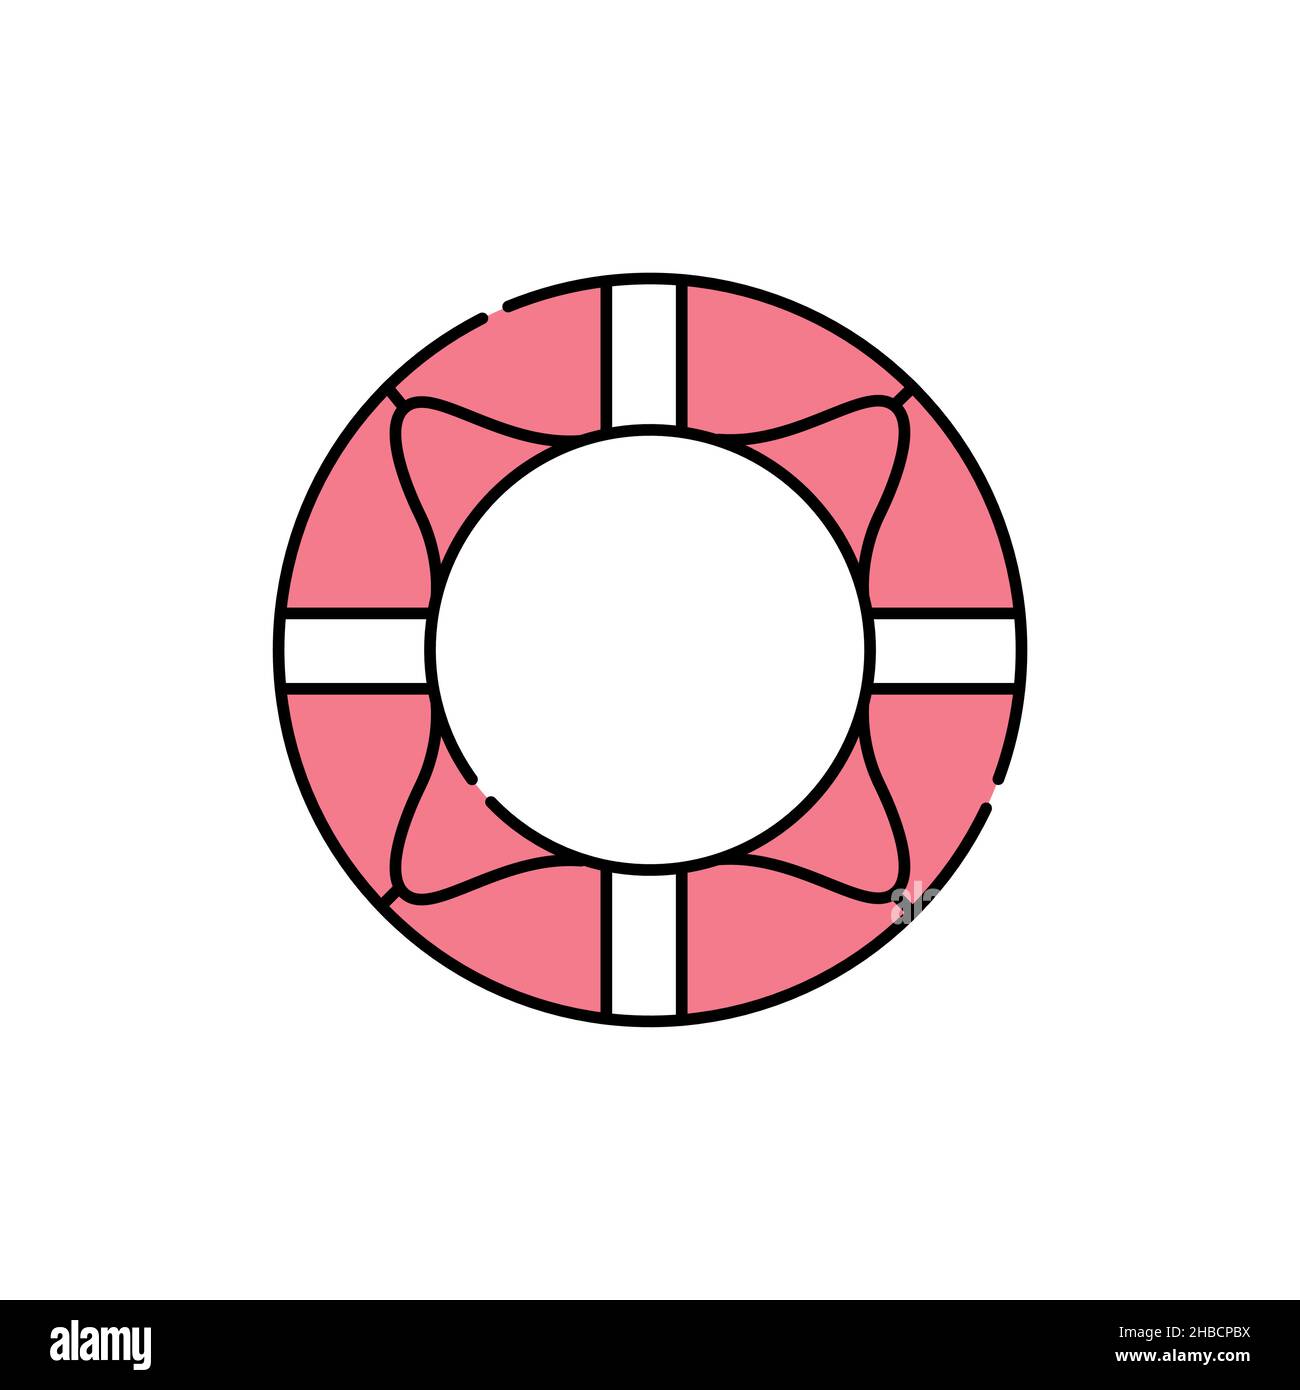 Lifebuoy color line icon. Isolated vector element. Outline pictogram for web page, mobile app, promo Stock Vector